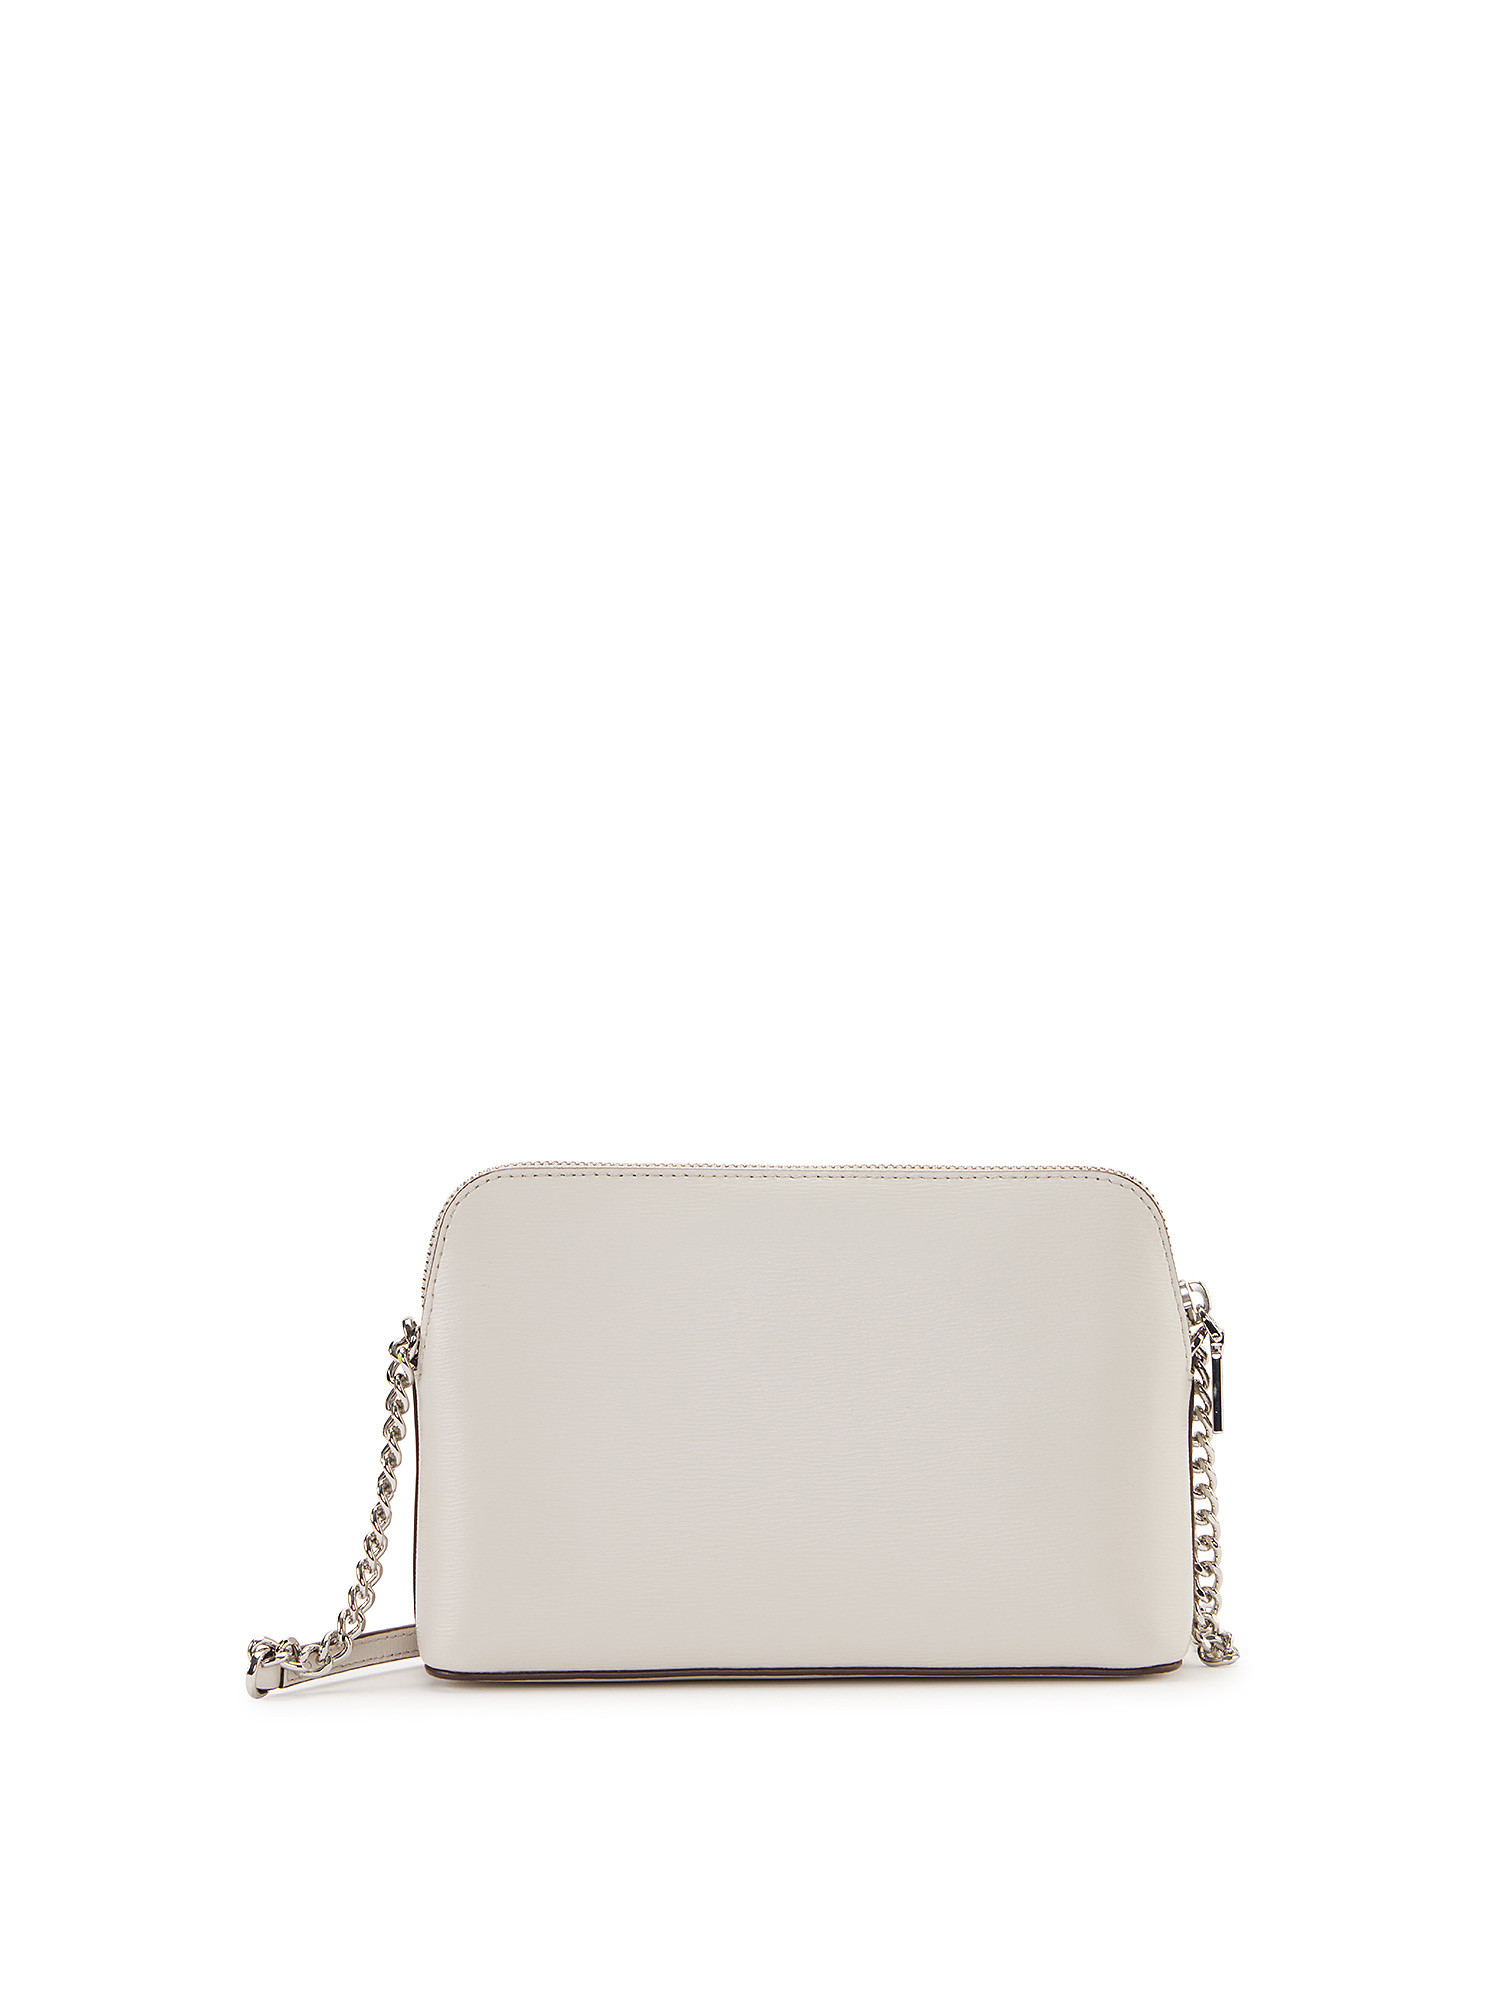 Dkny - Shoulder bag with chain and silver logo, White, large image number 2